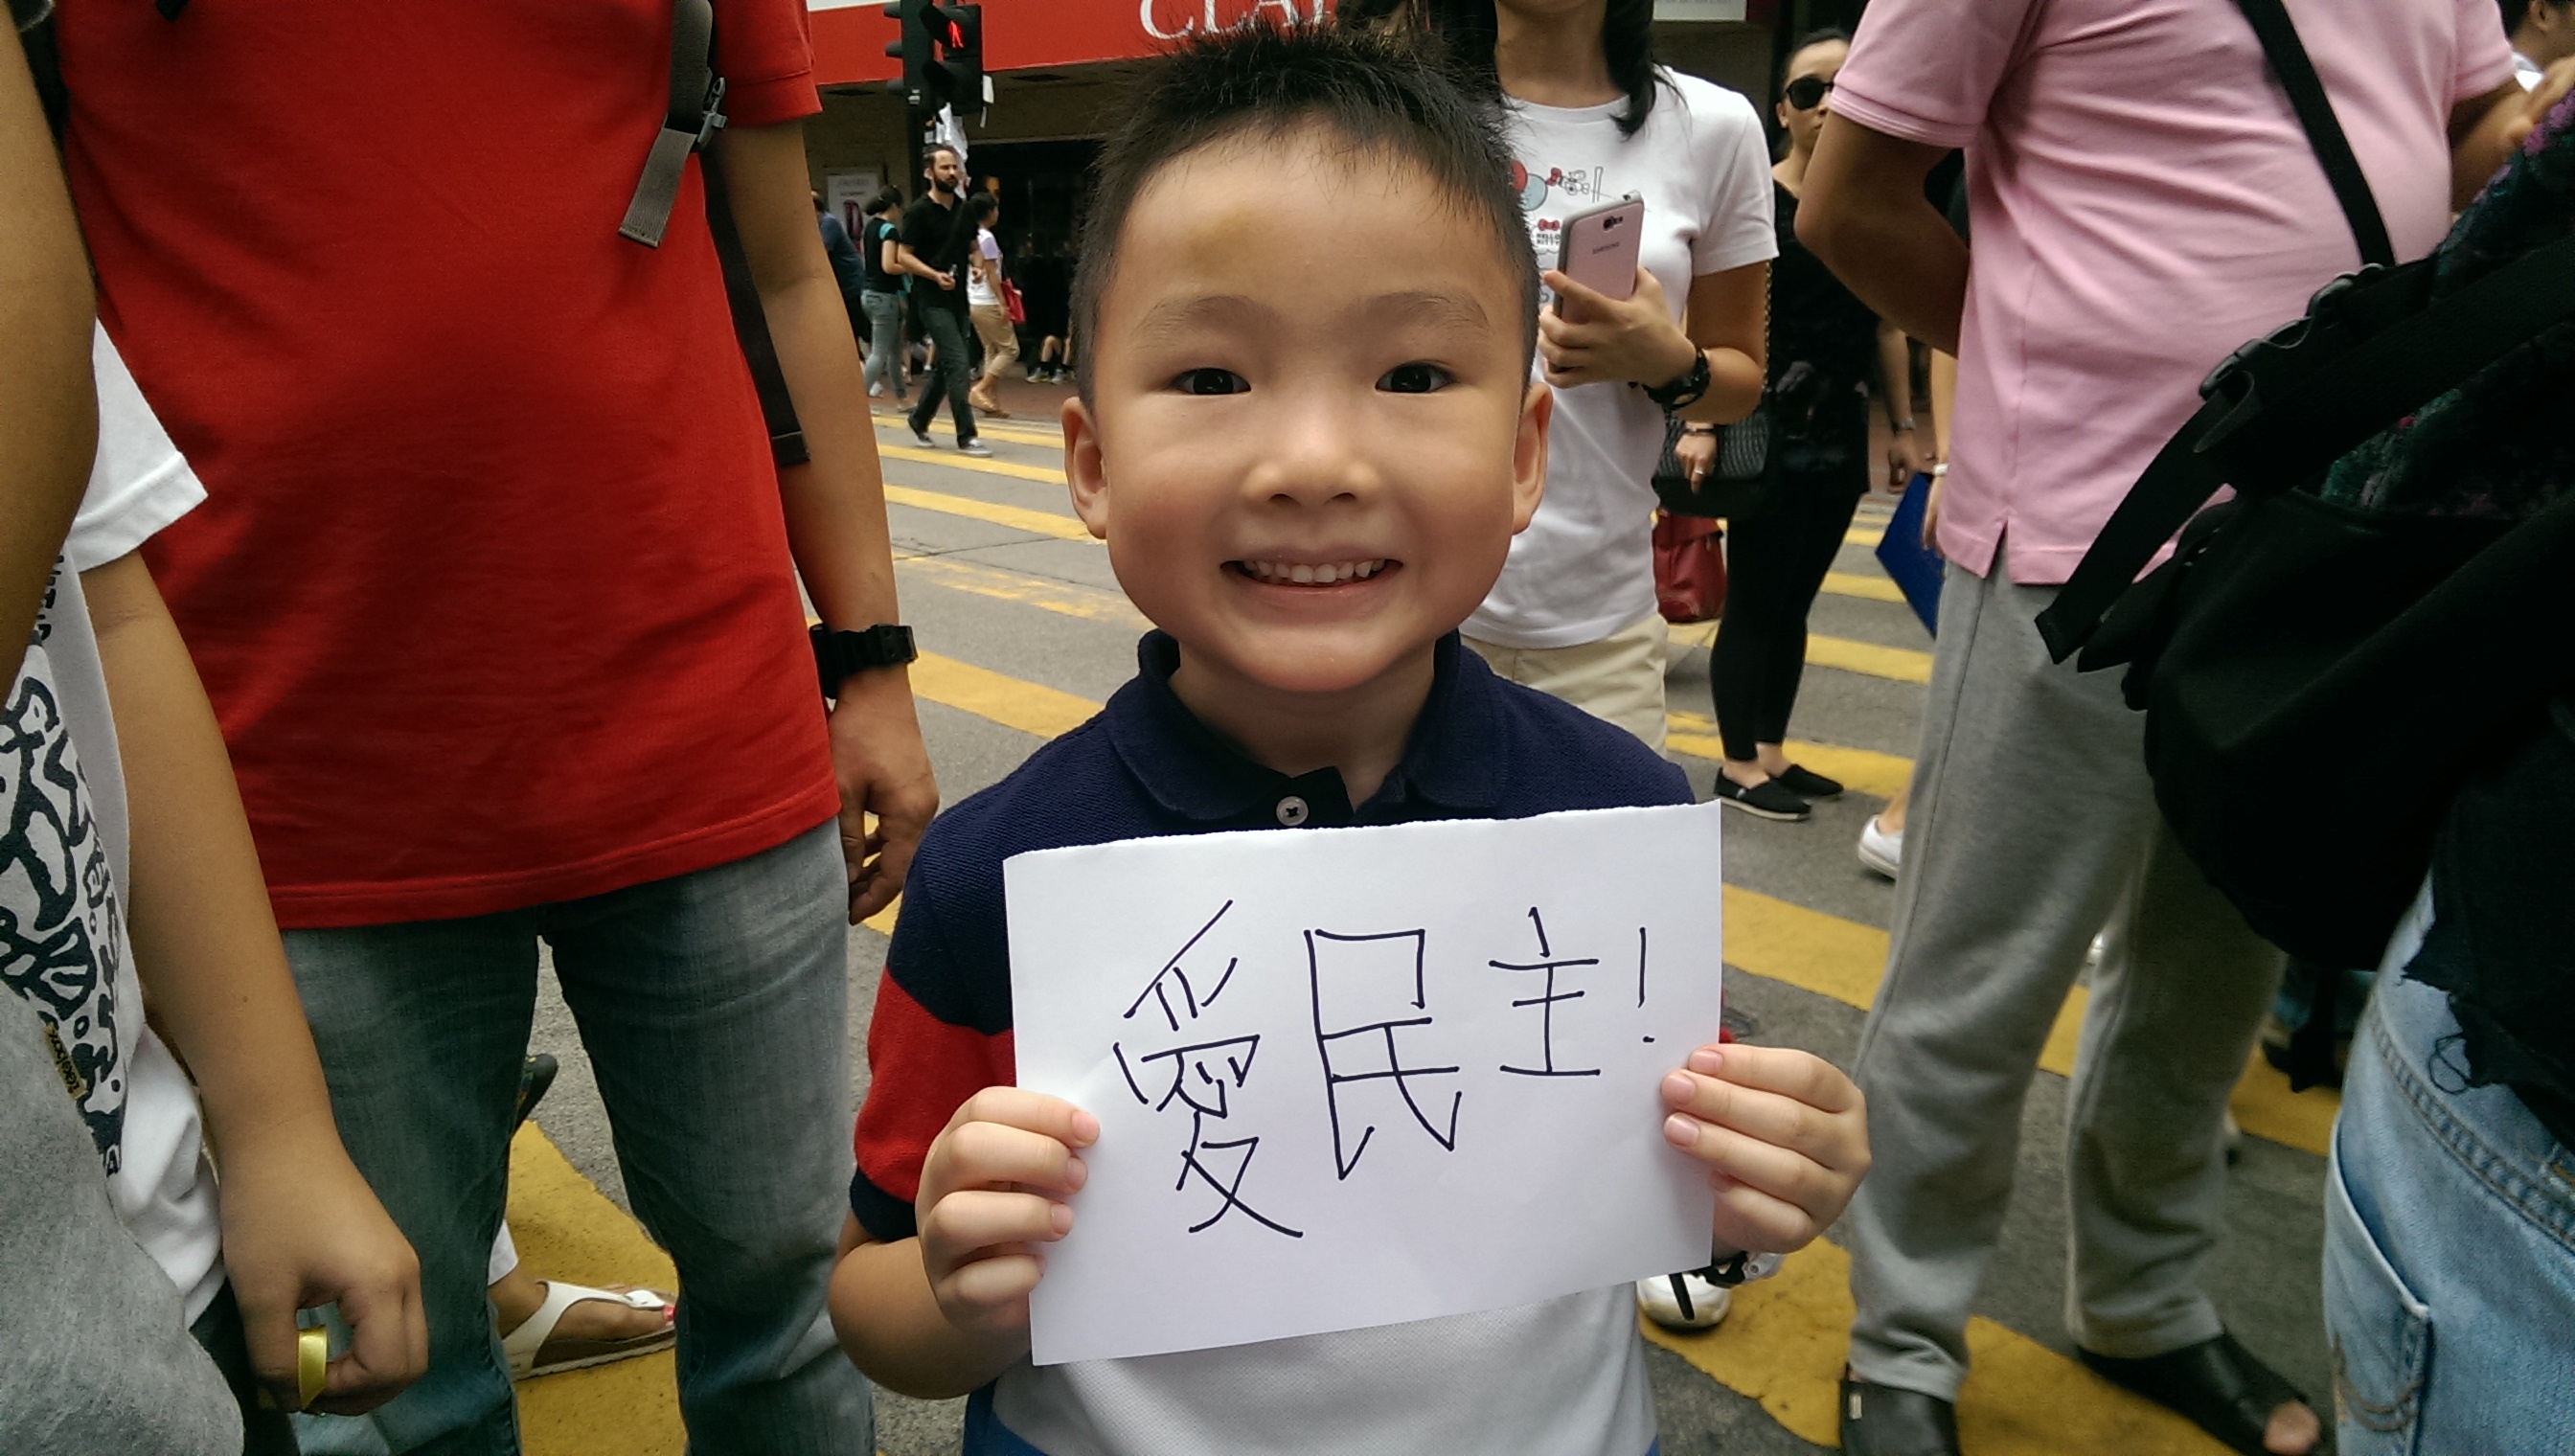 A little boy in the midst of Occupy Central holds up a sign saying "love democracy" in Chinese. Photo: SCMP Pictures